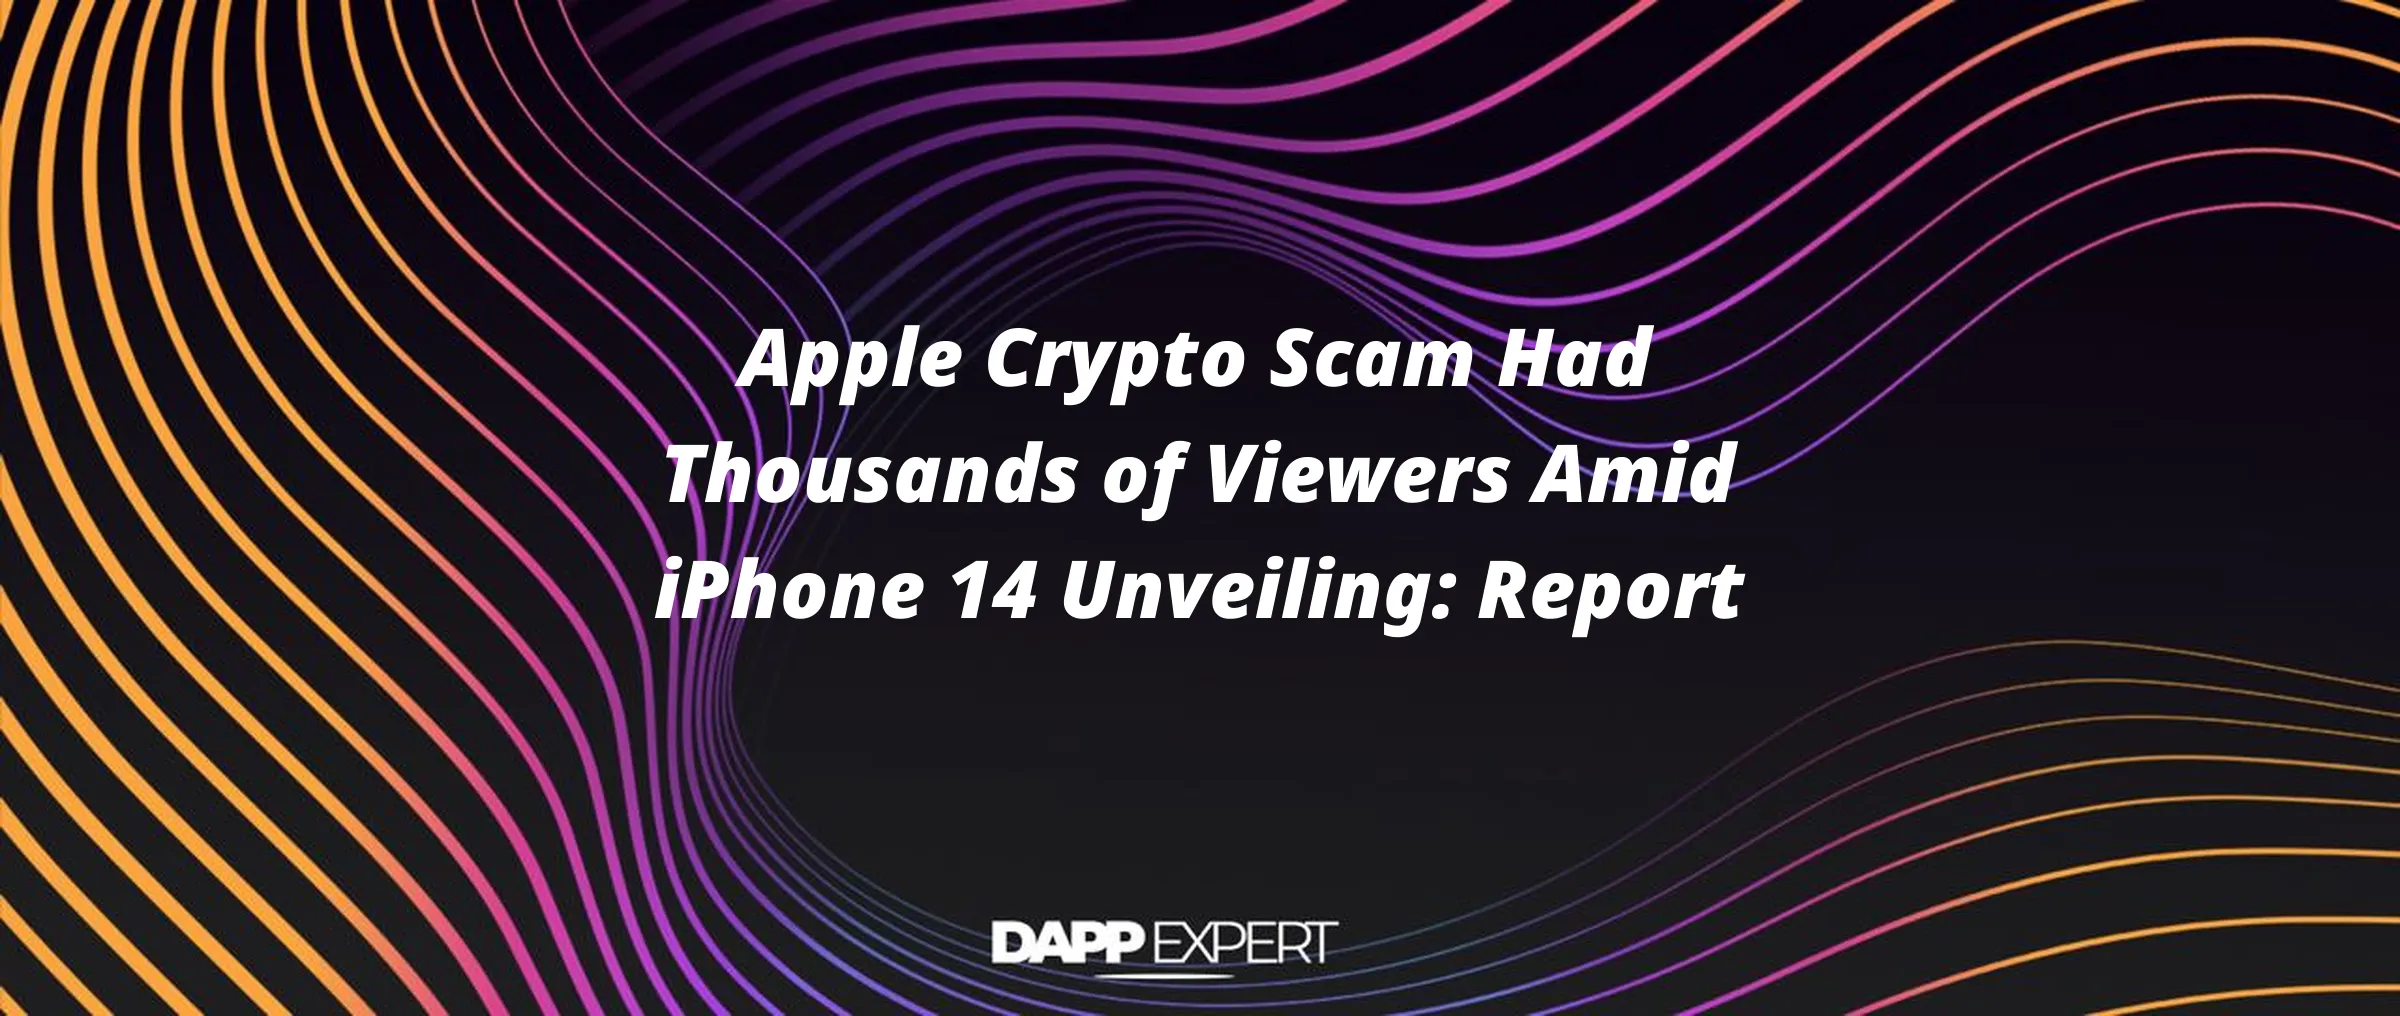 Apple Crypto Scam Had Thousands of Viewers Amid iPhone 14 Unveiling: Report